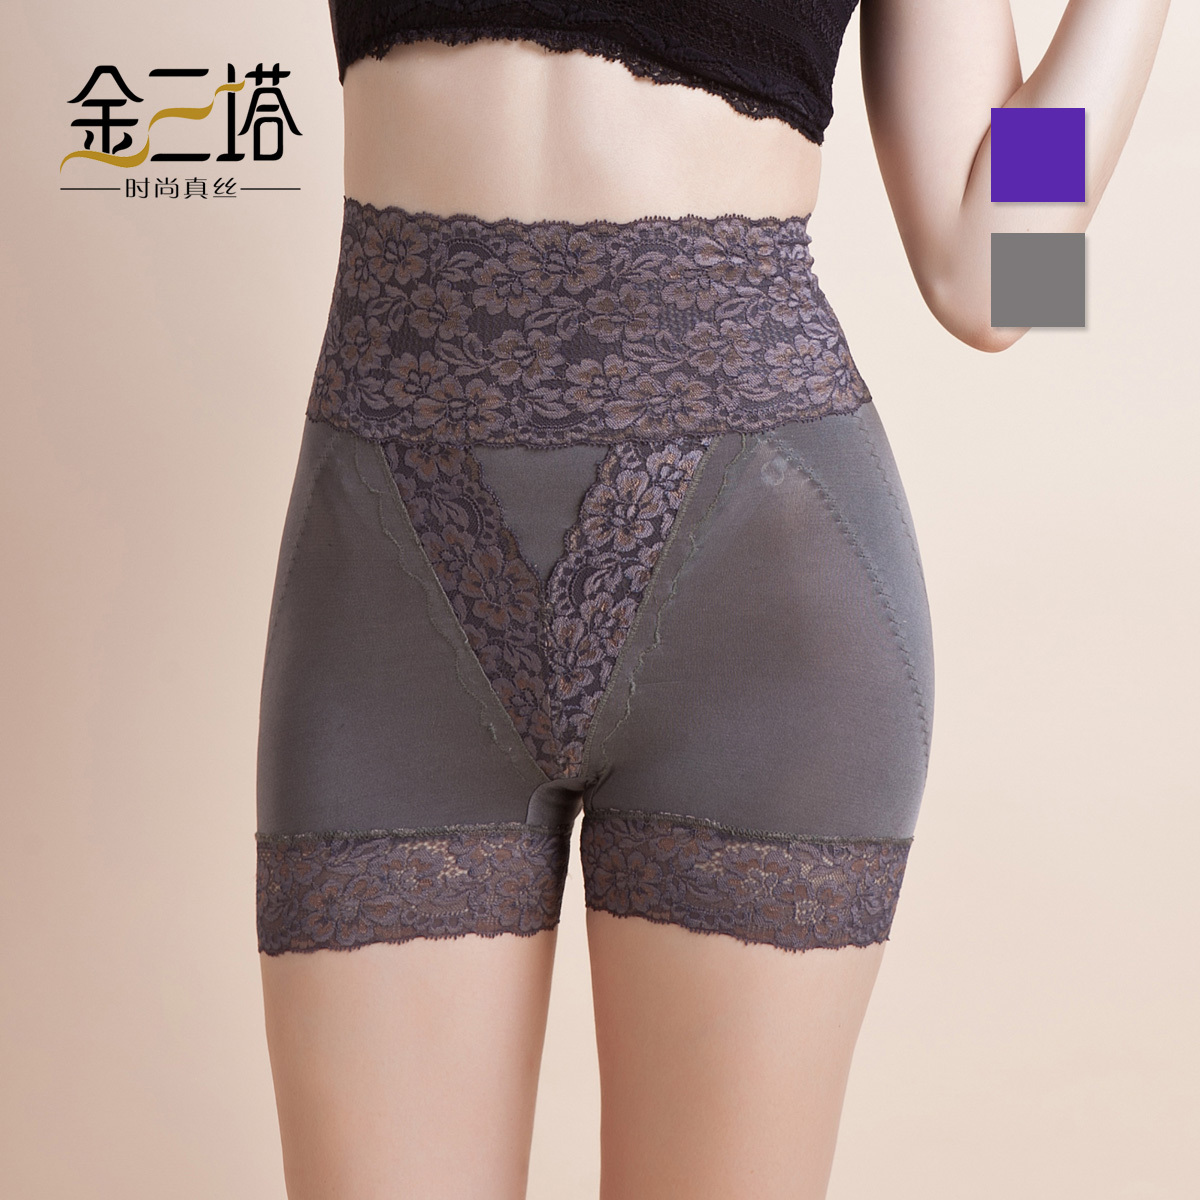 Spring and summer new arrival women's wire spandex laciness high waist abdomen body shaping shorts drawing corset beauty care